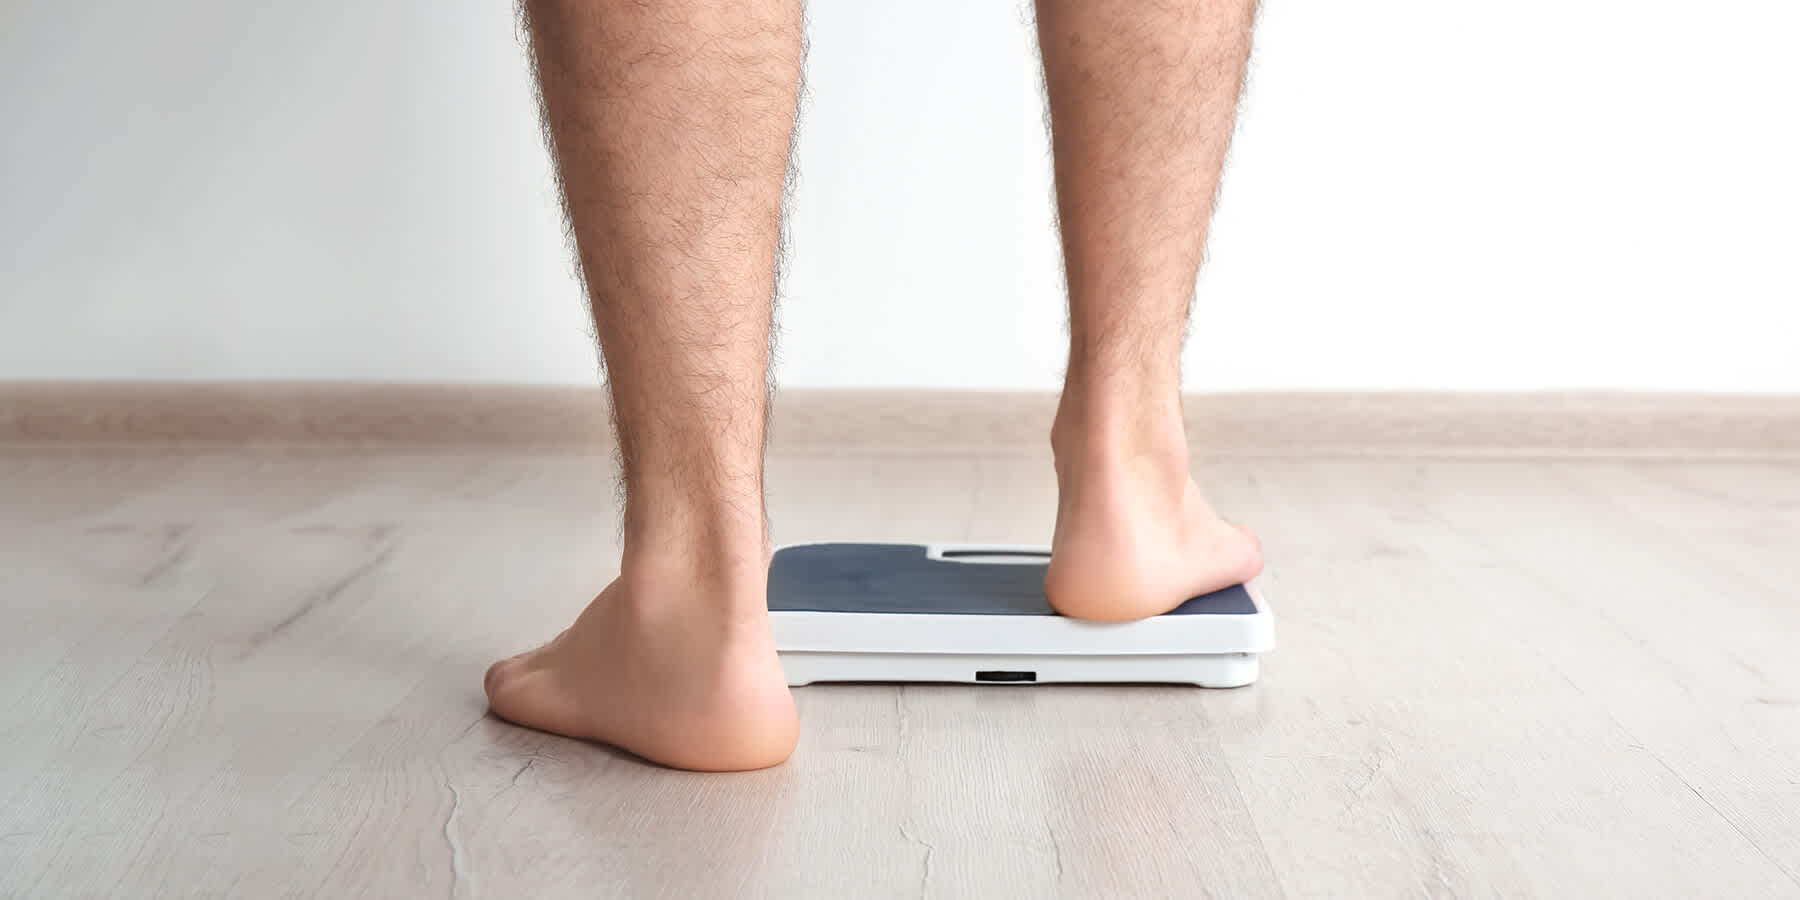 Person stepping on bathroom scale while wondering about comorbidities for weight loss surgery